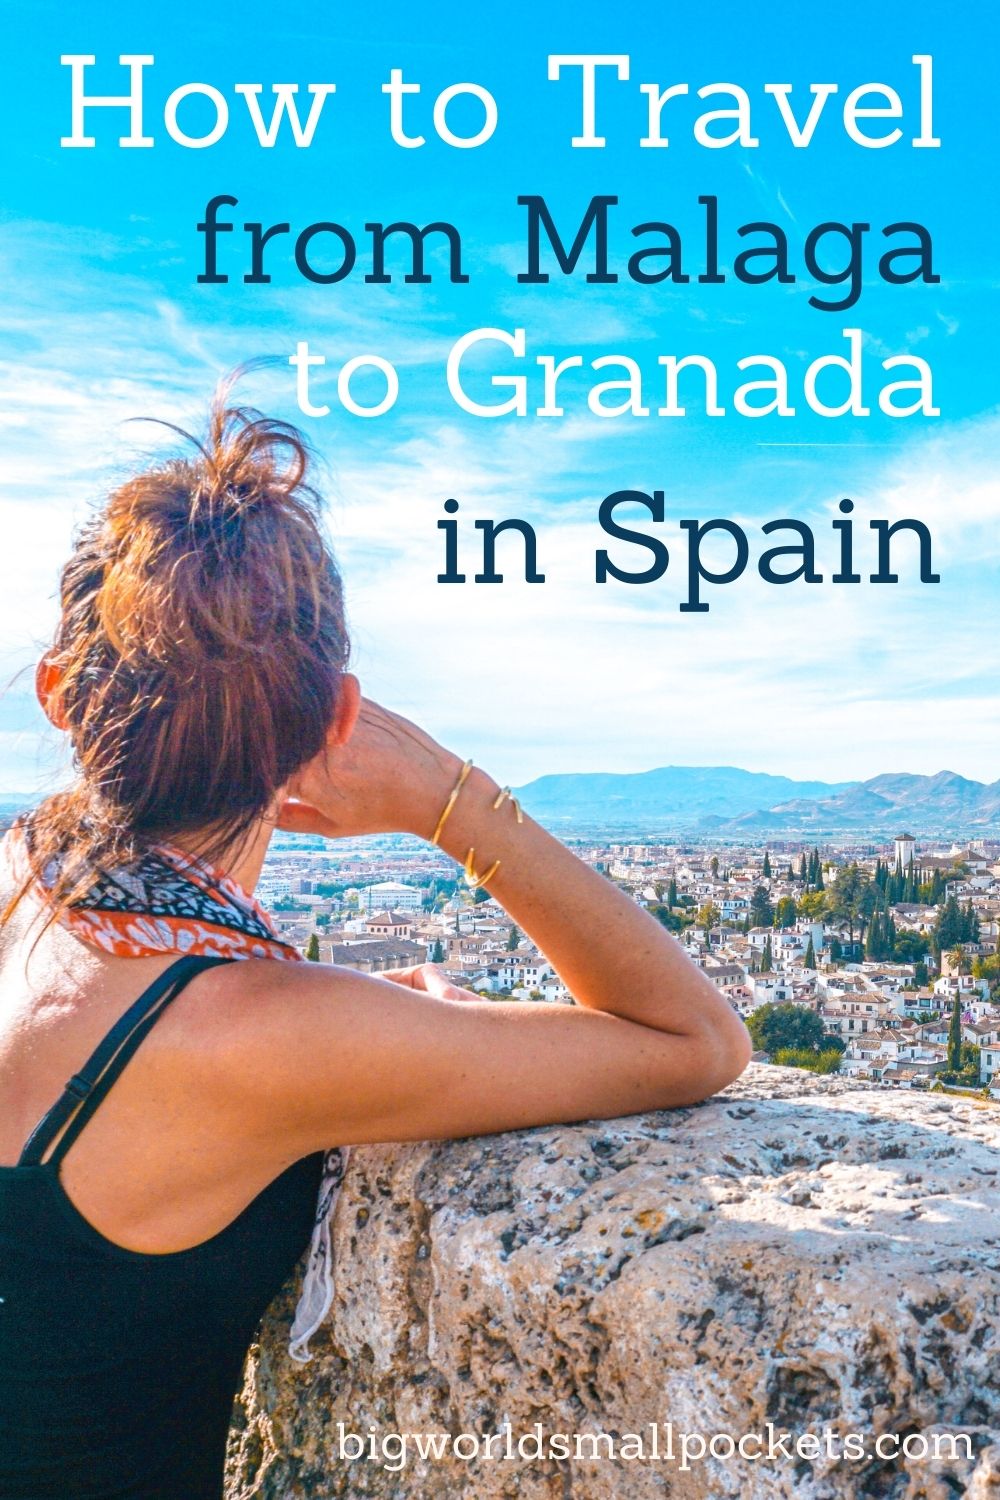 How to Travel from Malaga to Granada in Spain